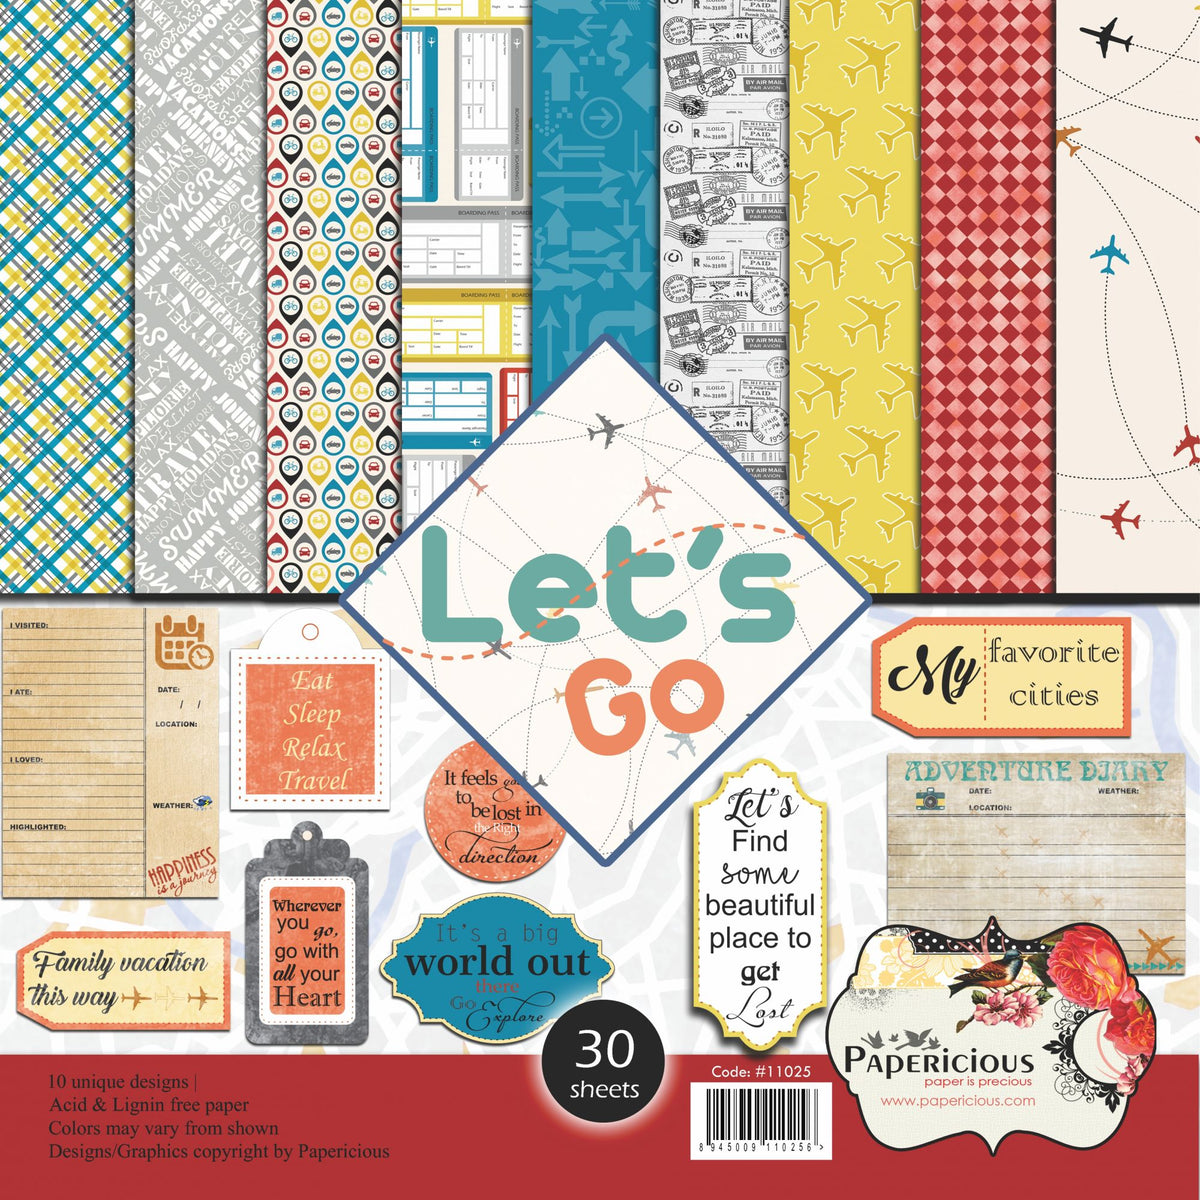 PAPERICIOUS - Lets Go -  Designer Pattern Printed Scrapbook Papers 12x12 inch / 30 sheets